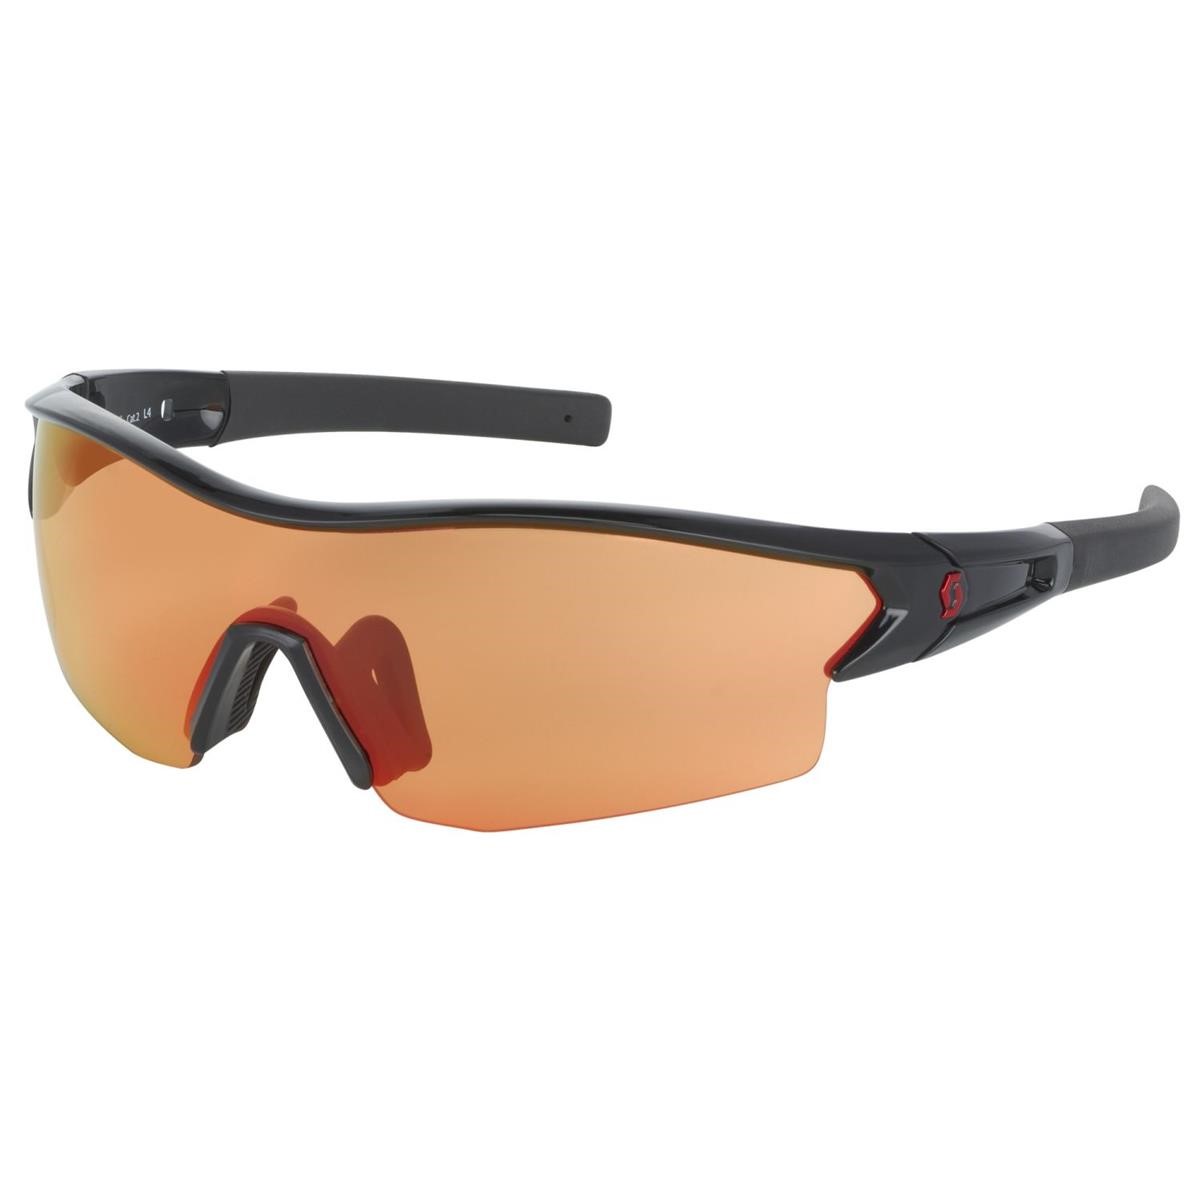 Scott Sportbrille Leap Black Glossy Red Chrome Amplifier + Clear